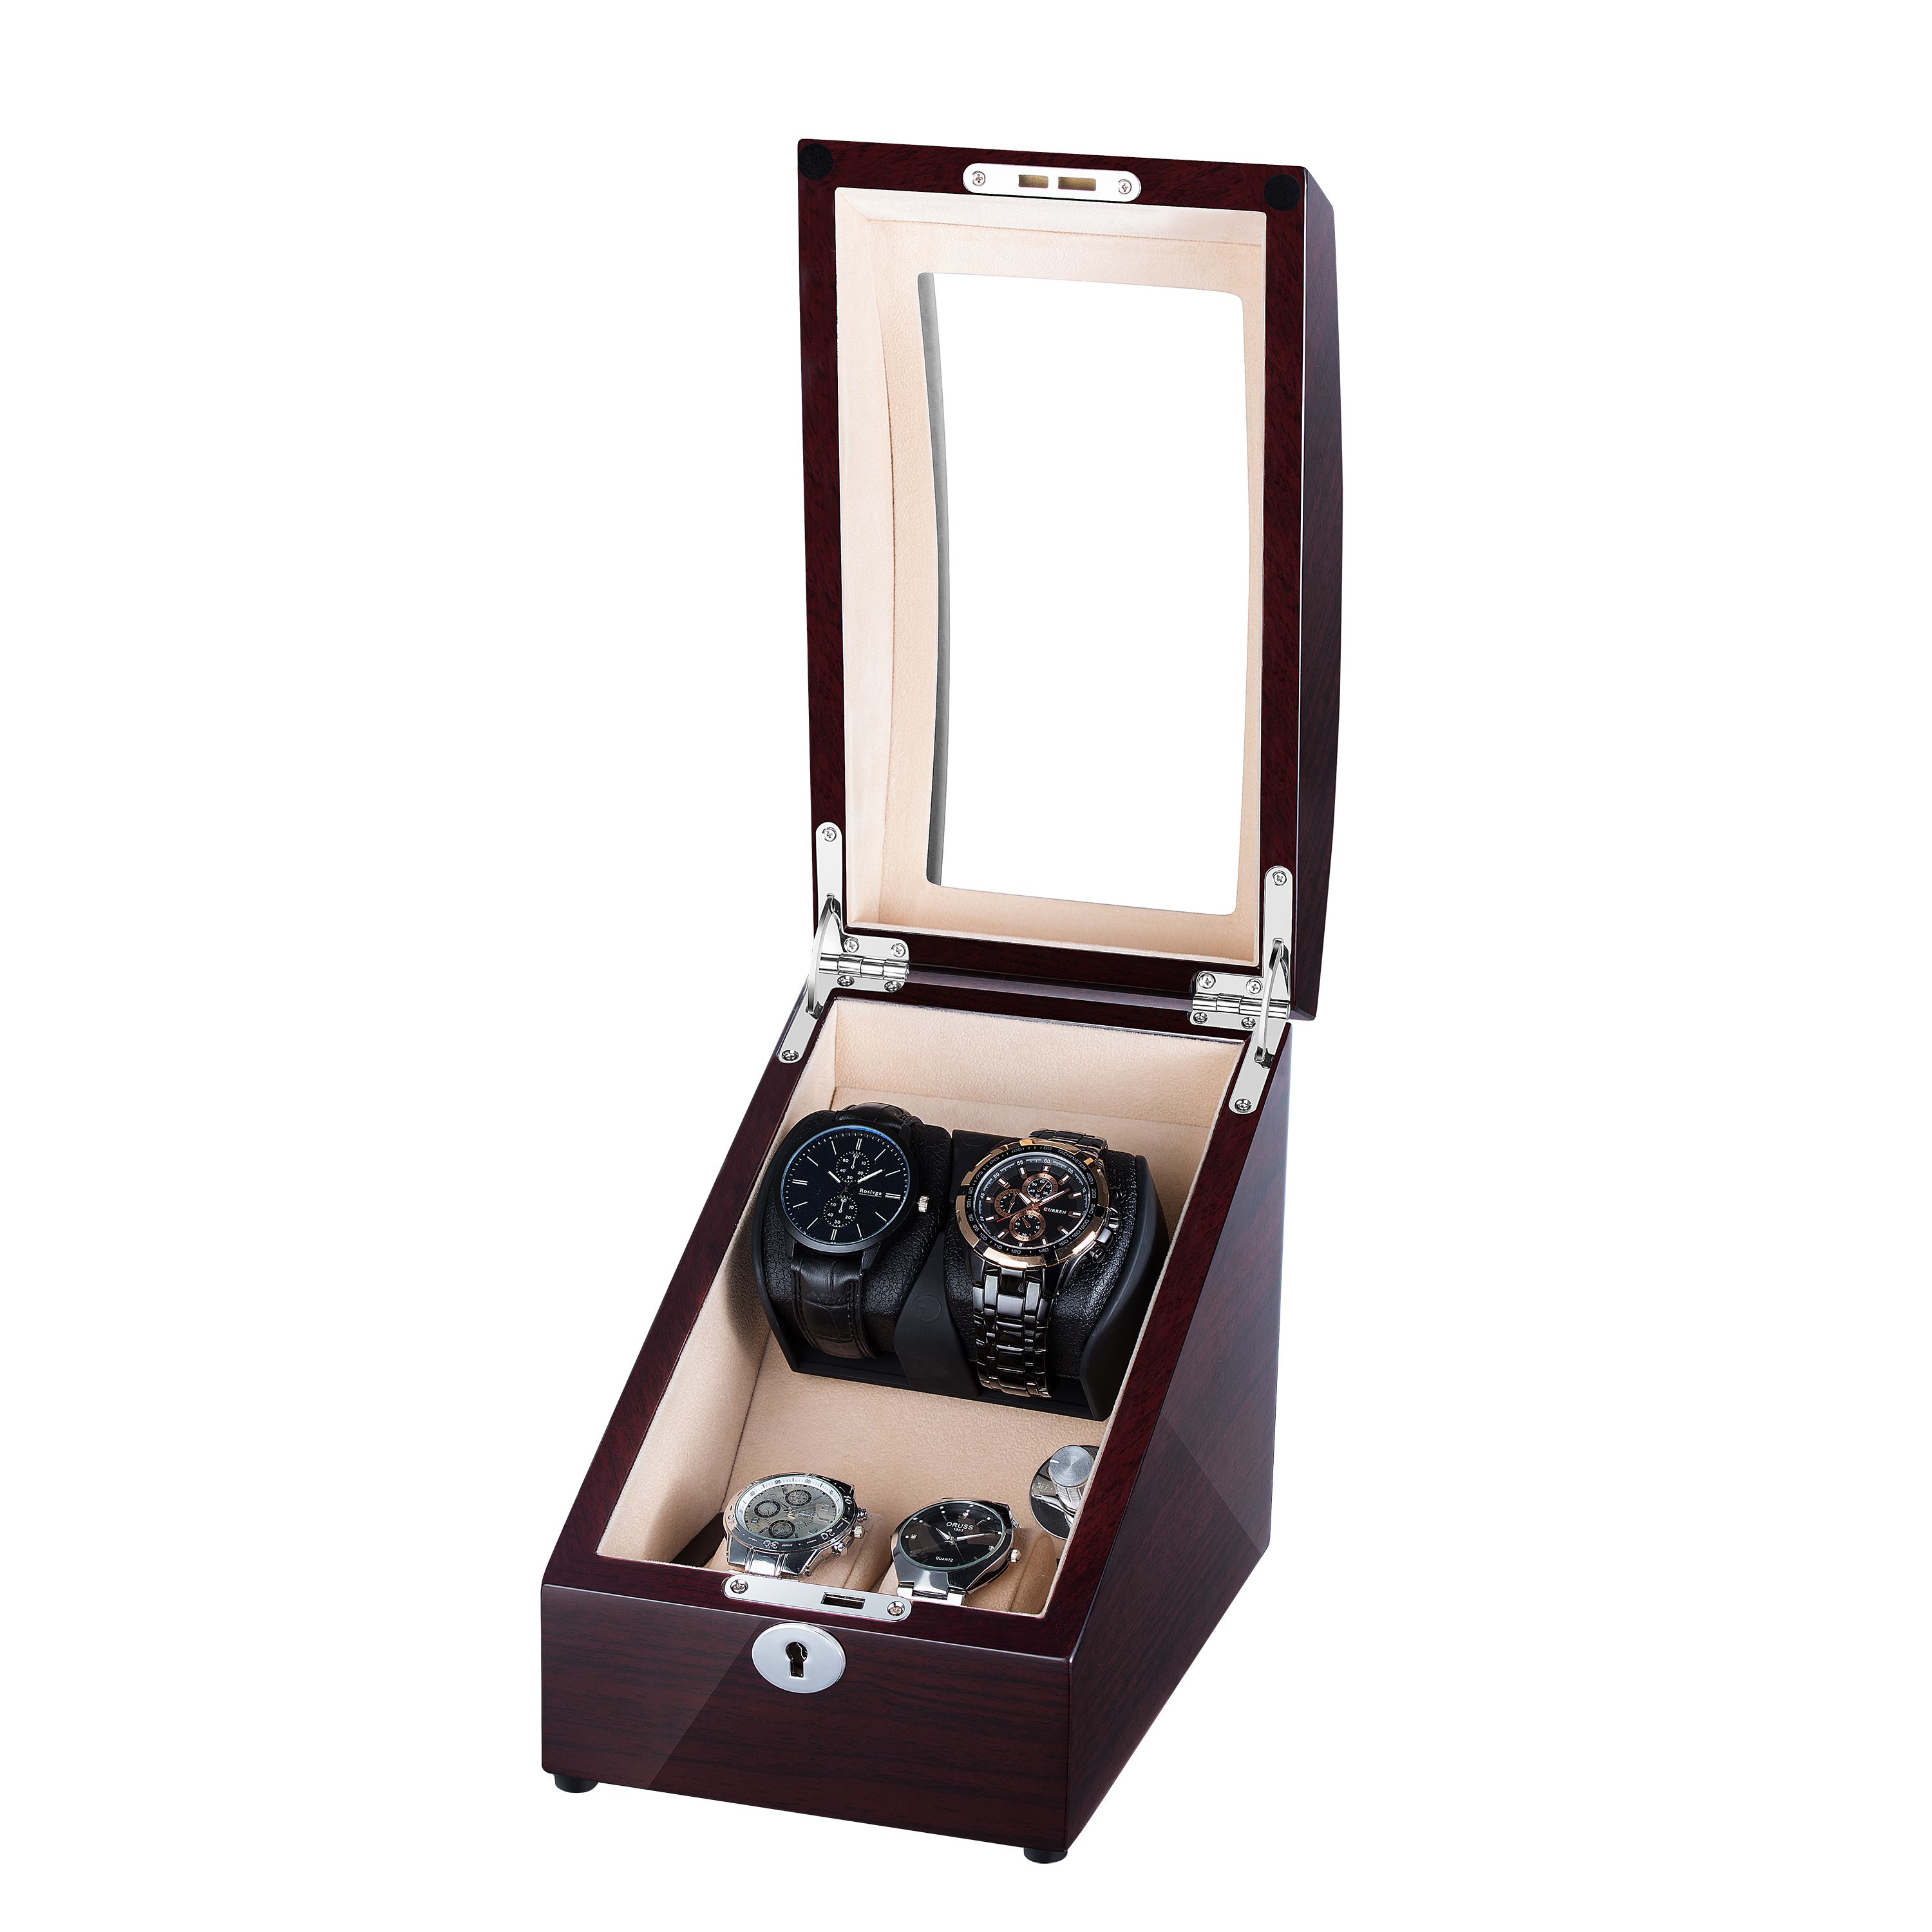 WATCH WINDER FOR 4 WATCHES